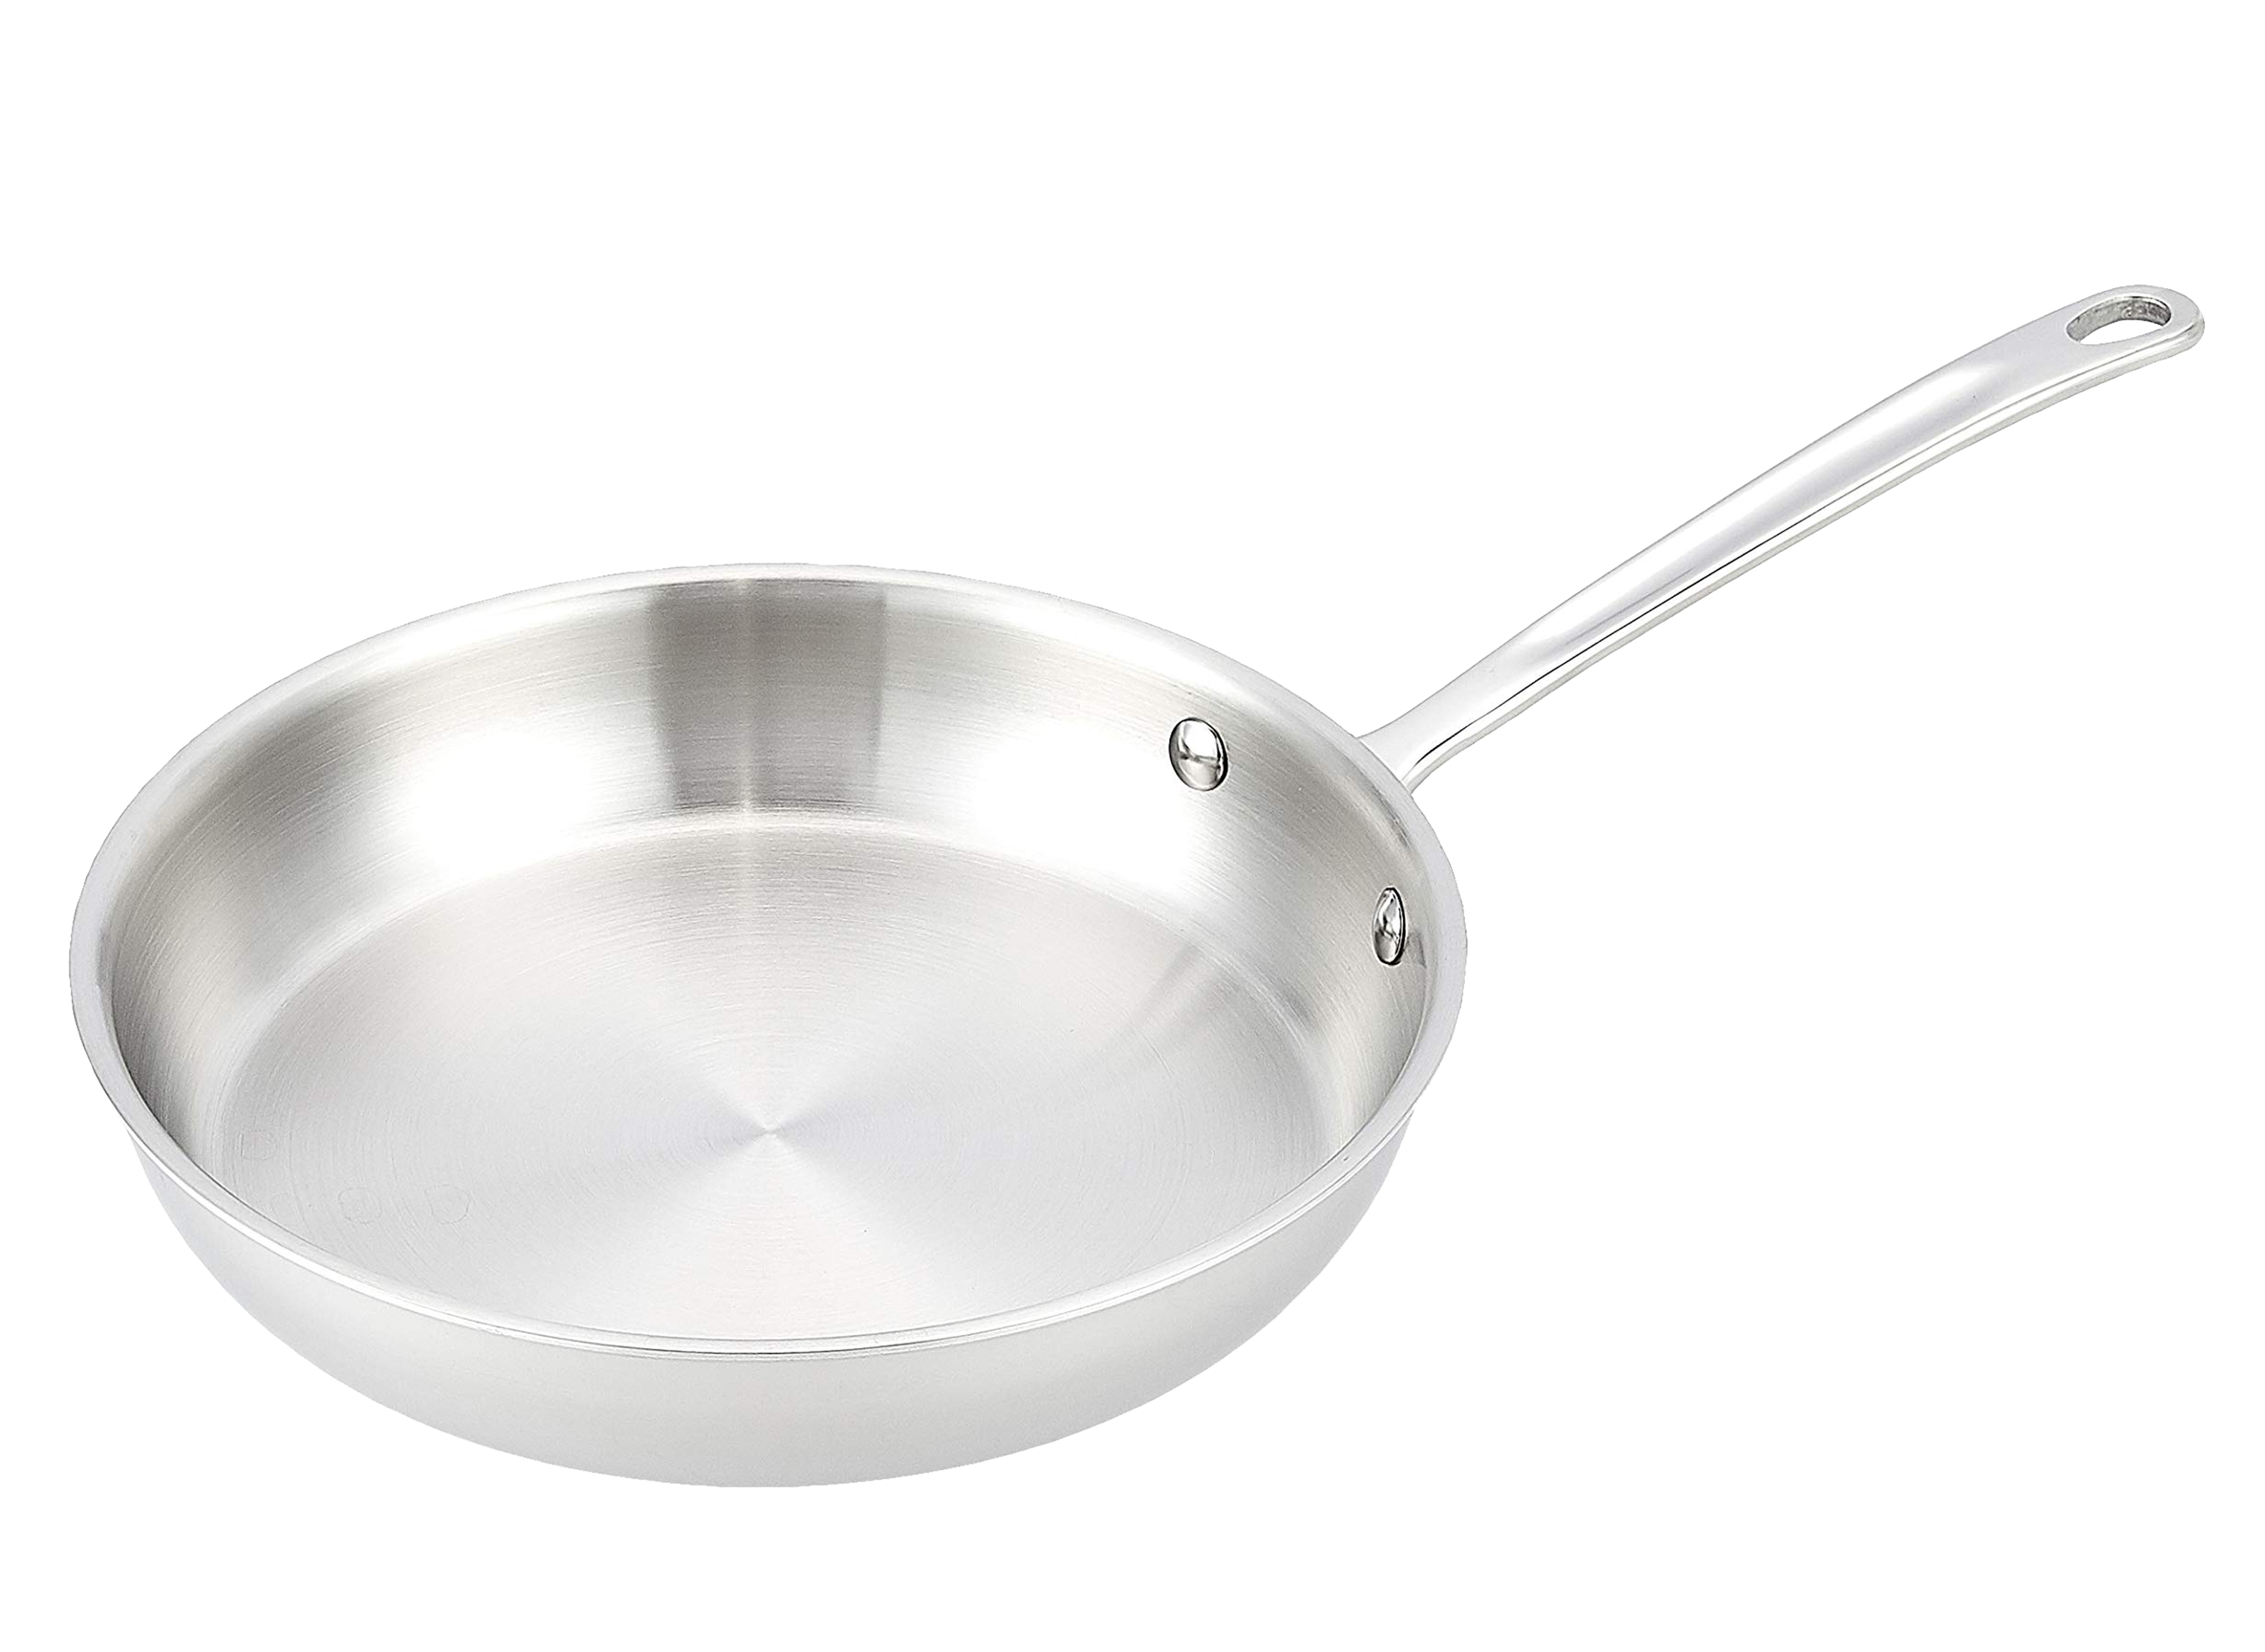 https://crdms.images.consumerreports.org/prod/products/cr/models/404690-frying-pans-stainless-steel-amazon-commerical-10023318.png